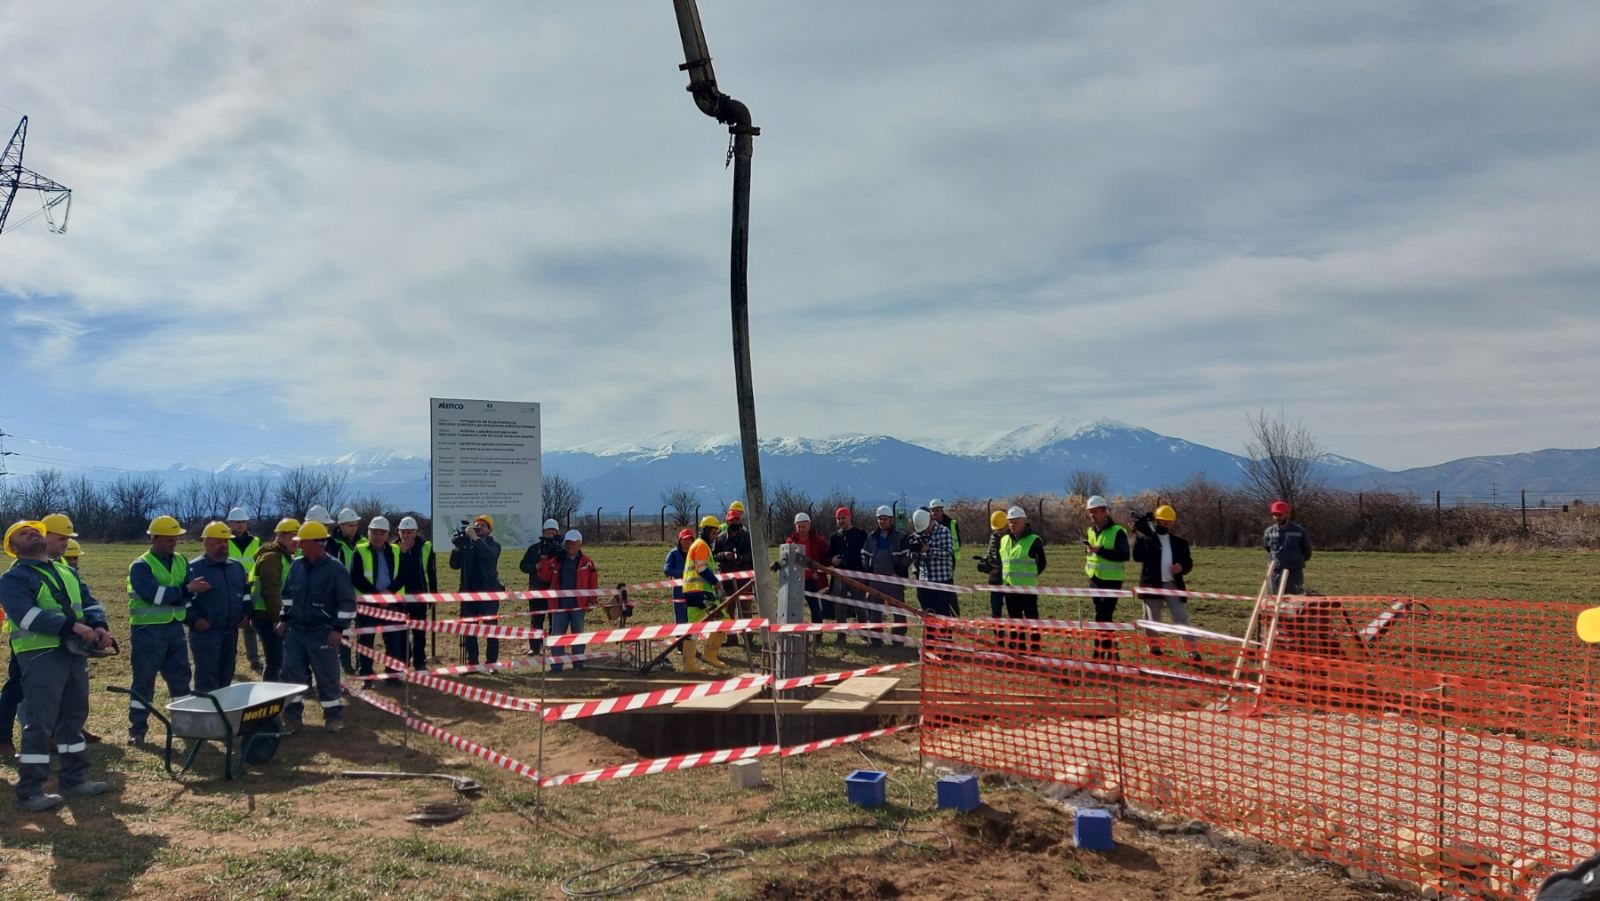 The region gets a new energy crossroad, the construction of the 400 kV interconnection Bitola – Elbasan has begun